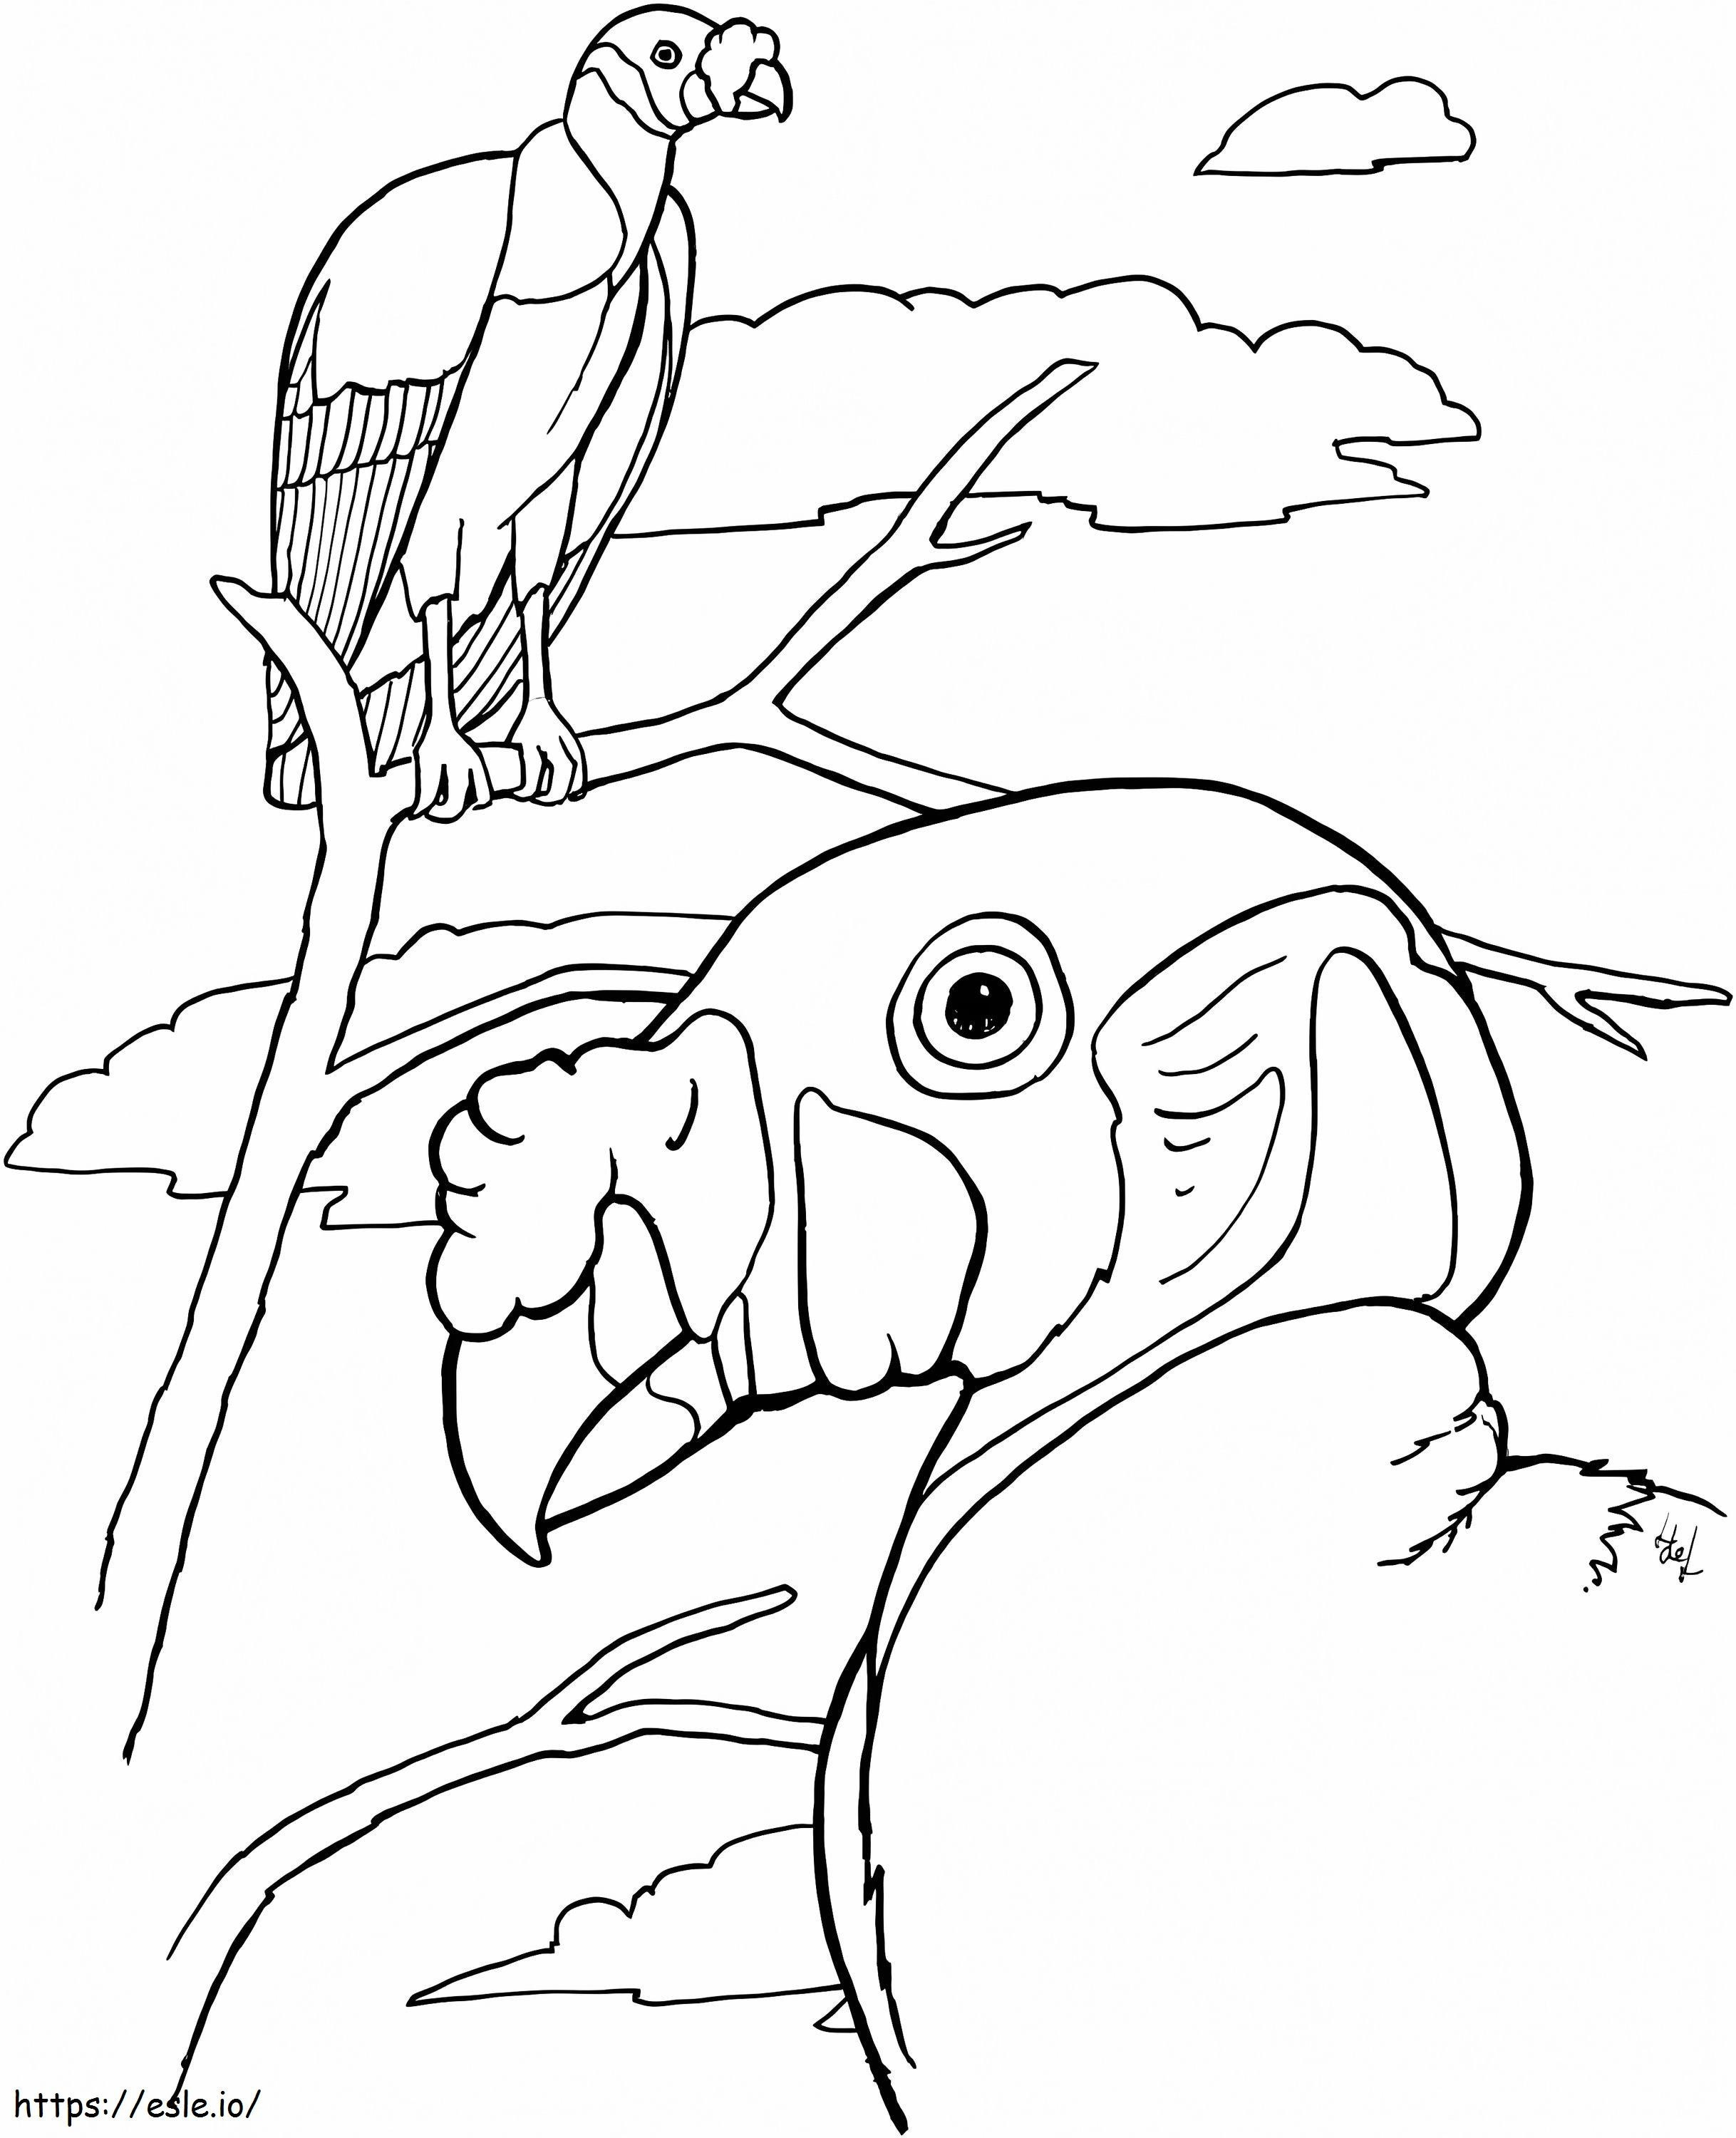 King Vultures coloring page